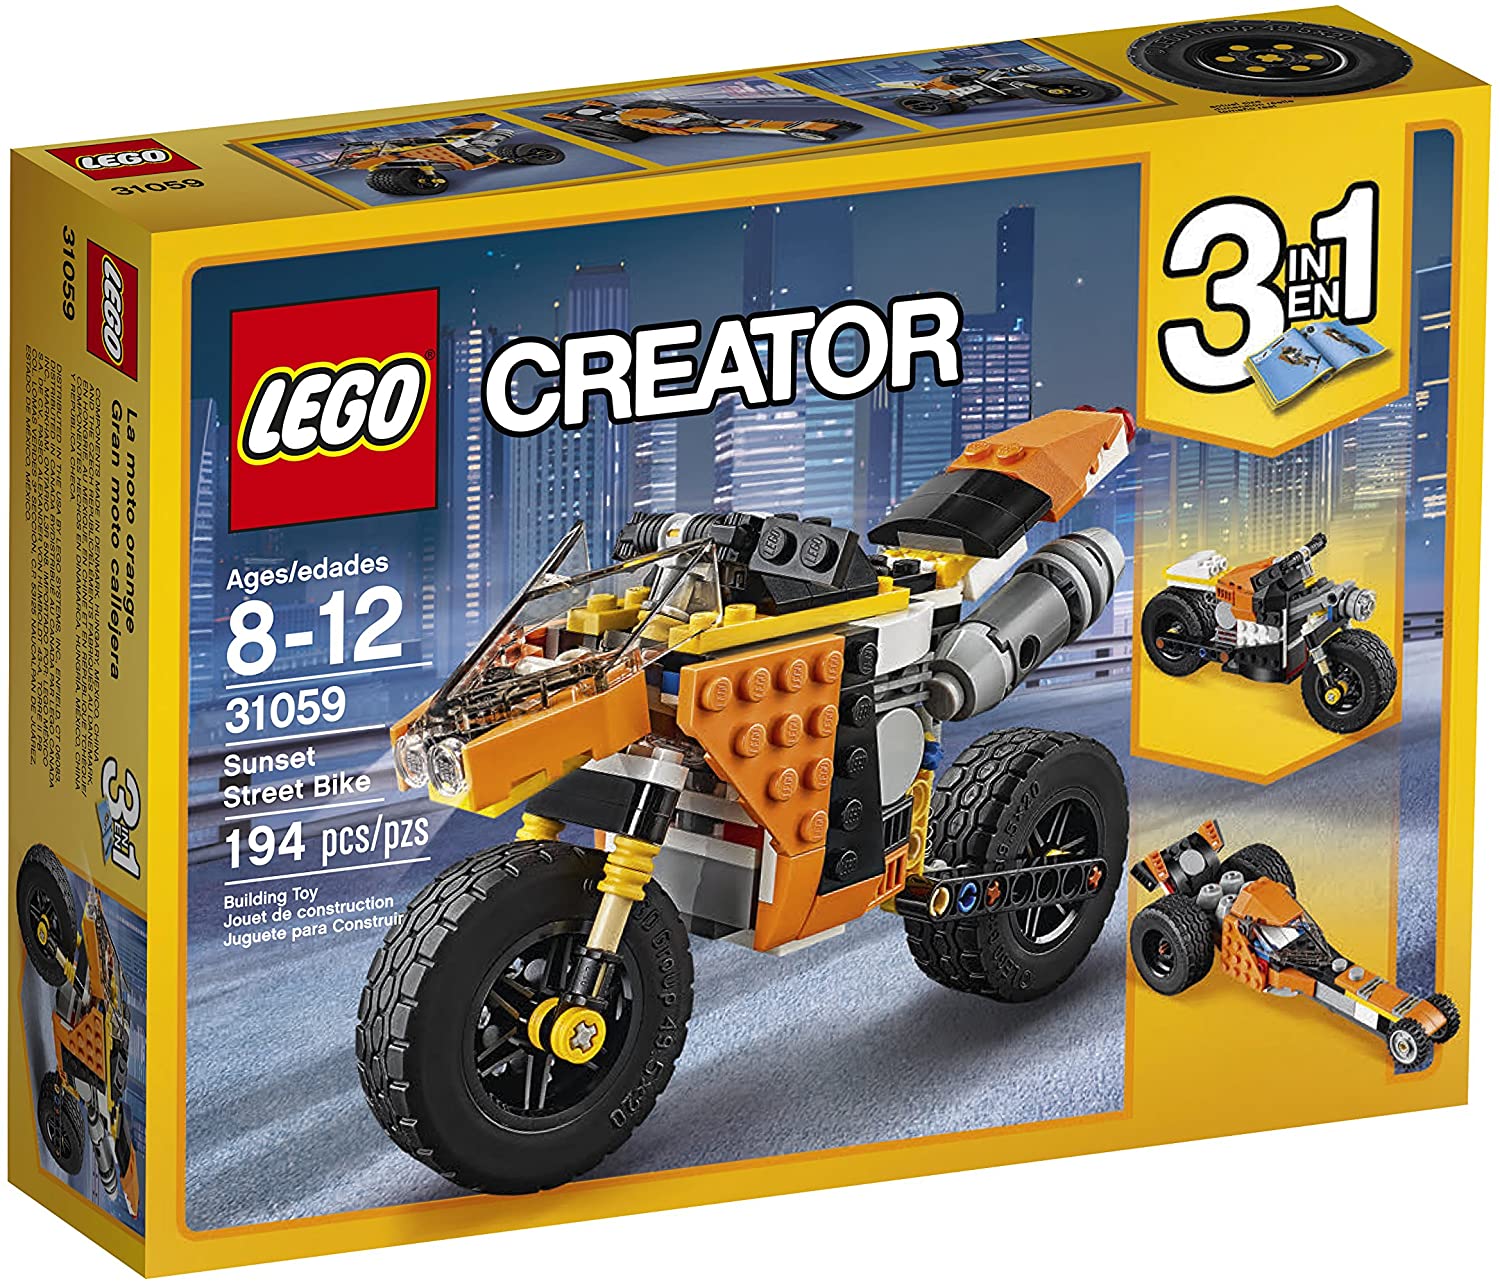 7 Best LEGO Motorcycle Sets 2023 - Buying Guide & Reviews 7